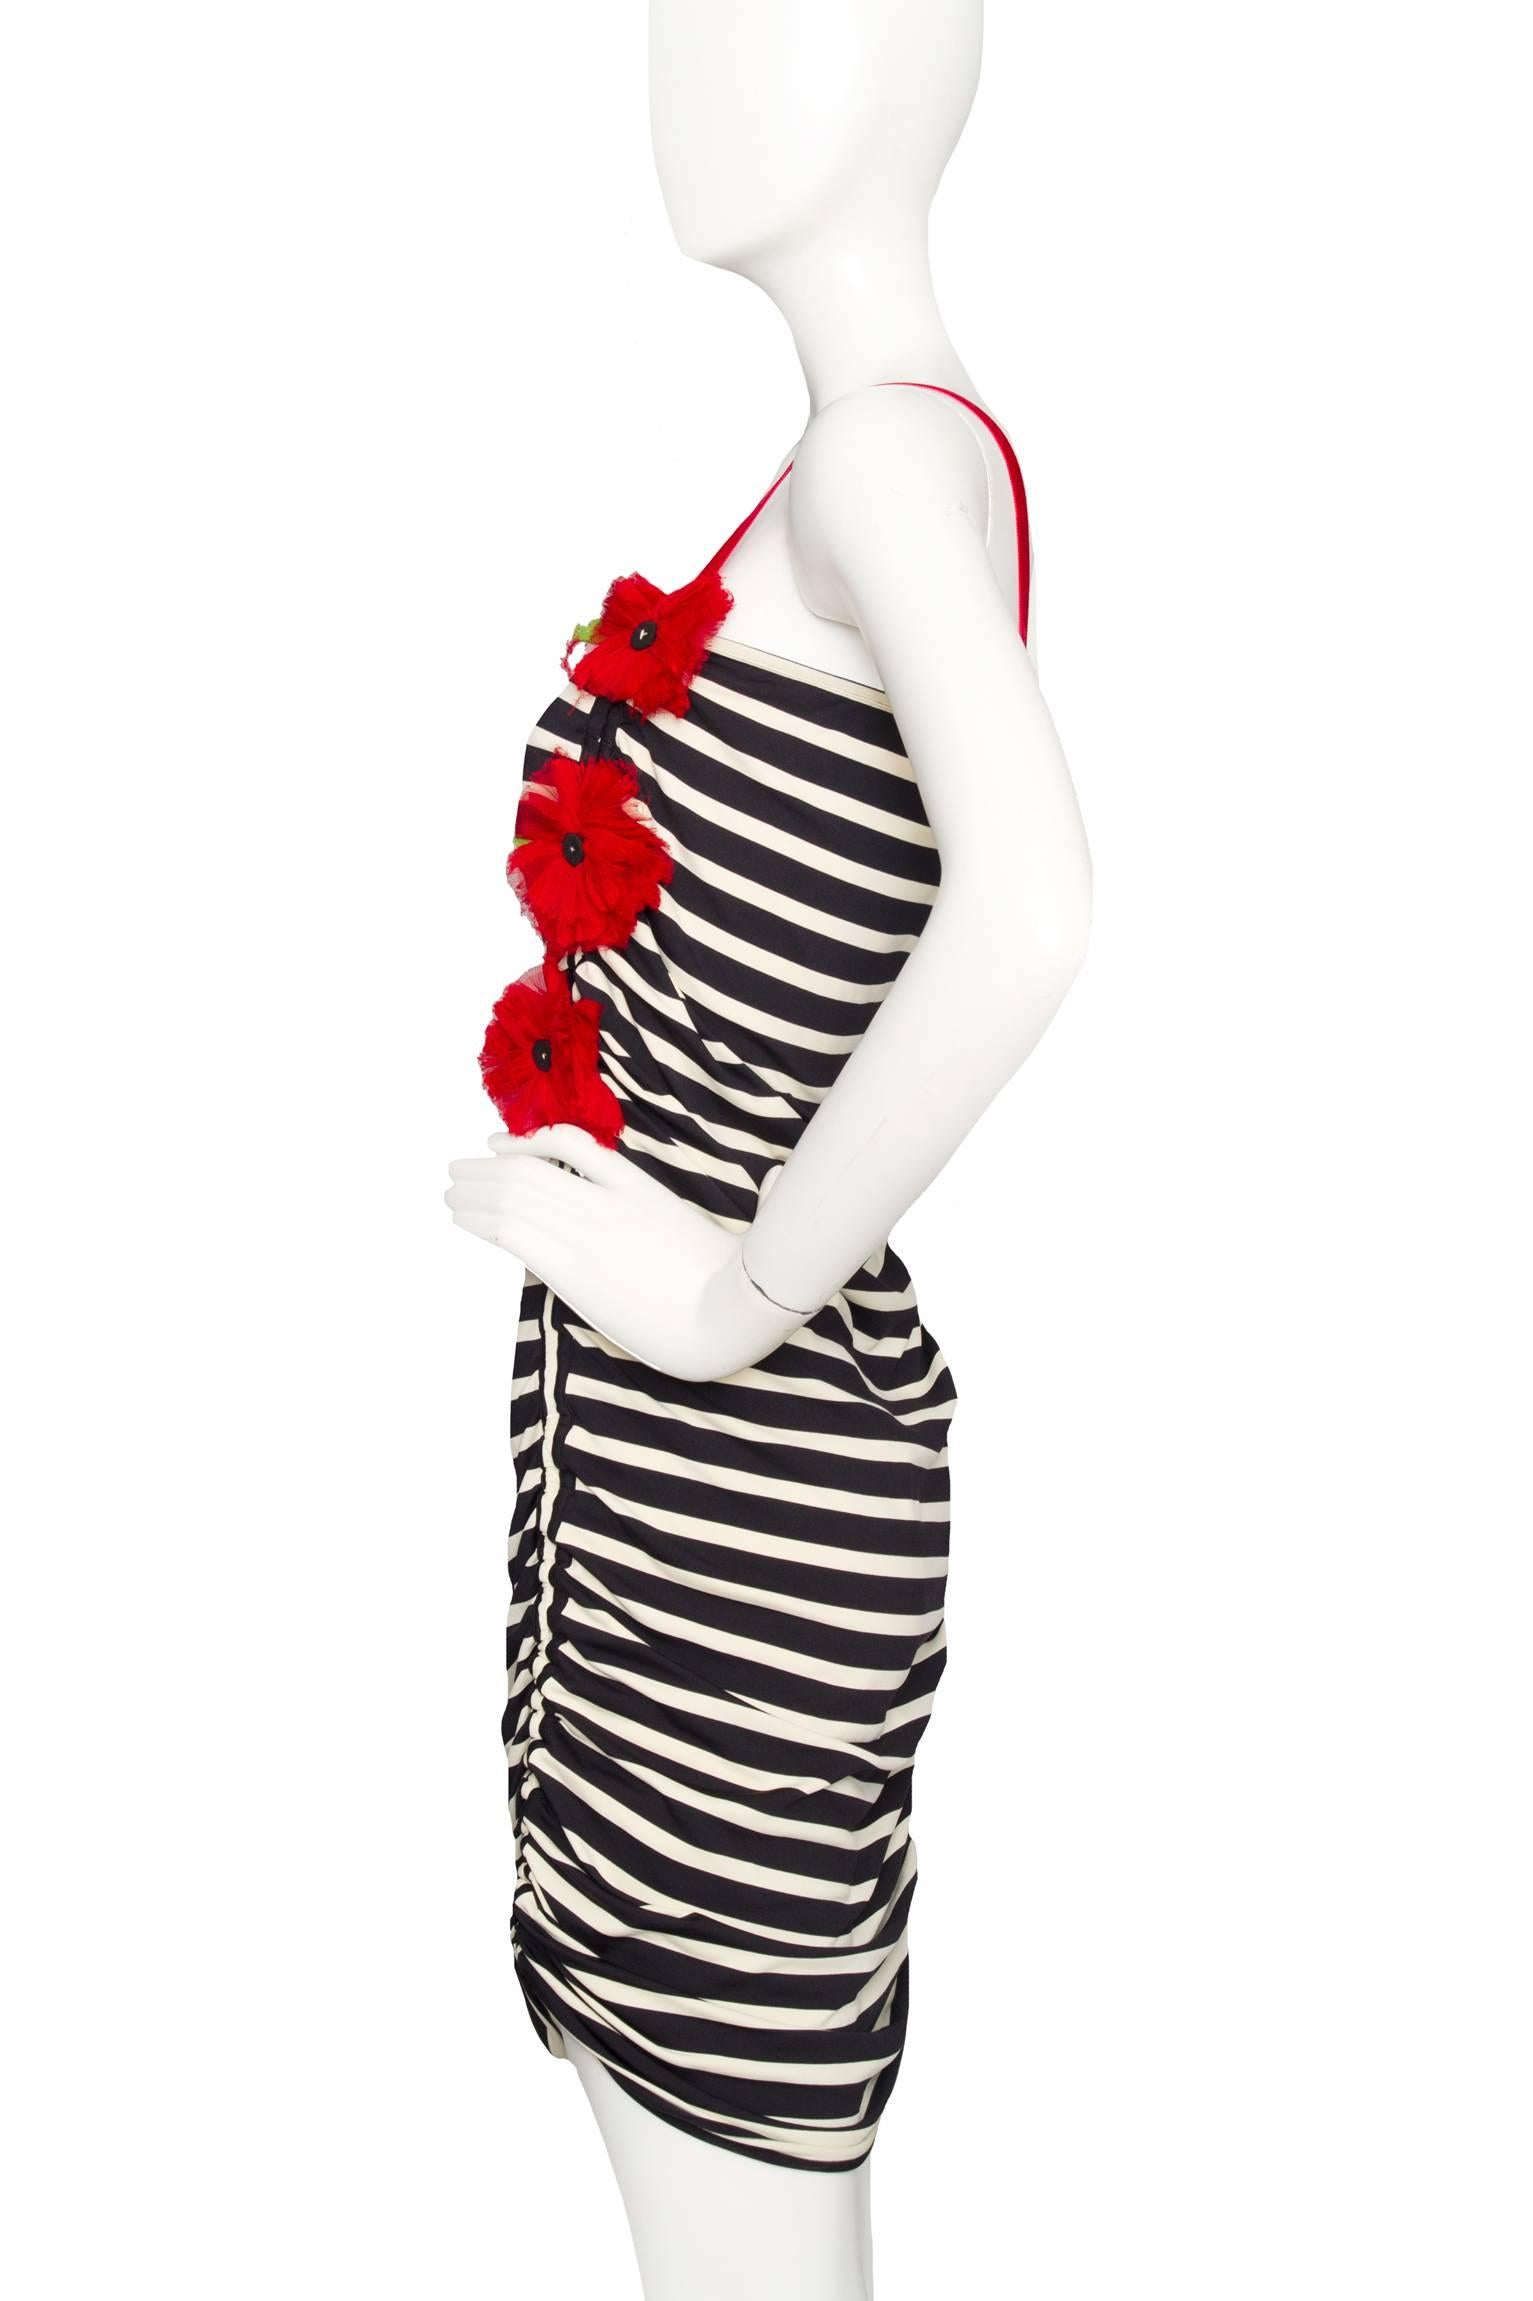 A figure-hugging 1990s Jean Paul Gaultier black and white vertical striped cocktail dress with elasticated ruching at the side. The dress has contrasting bright red velvet straps and red flower appliqué along the left side of the bust. 

The size of